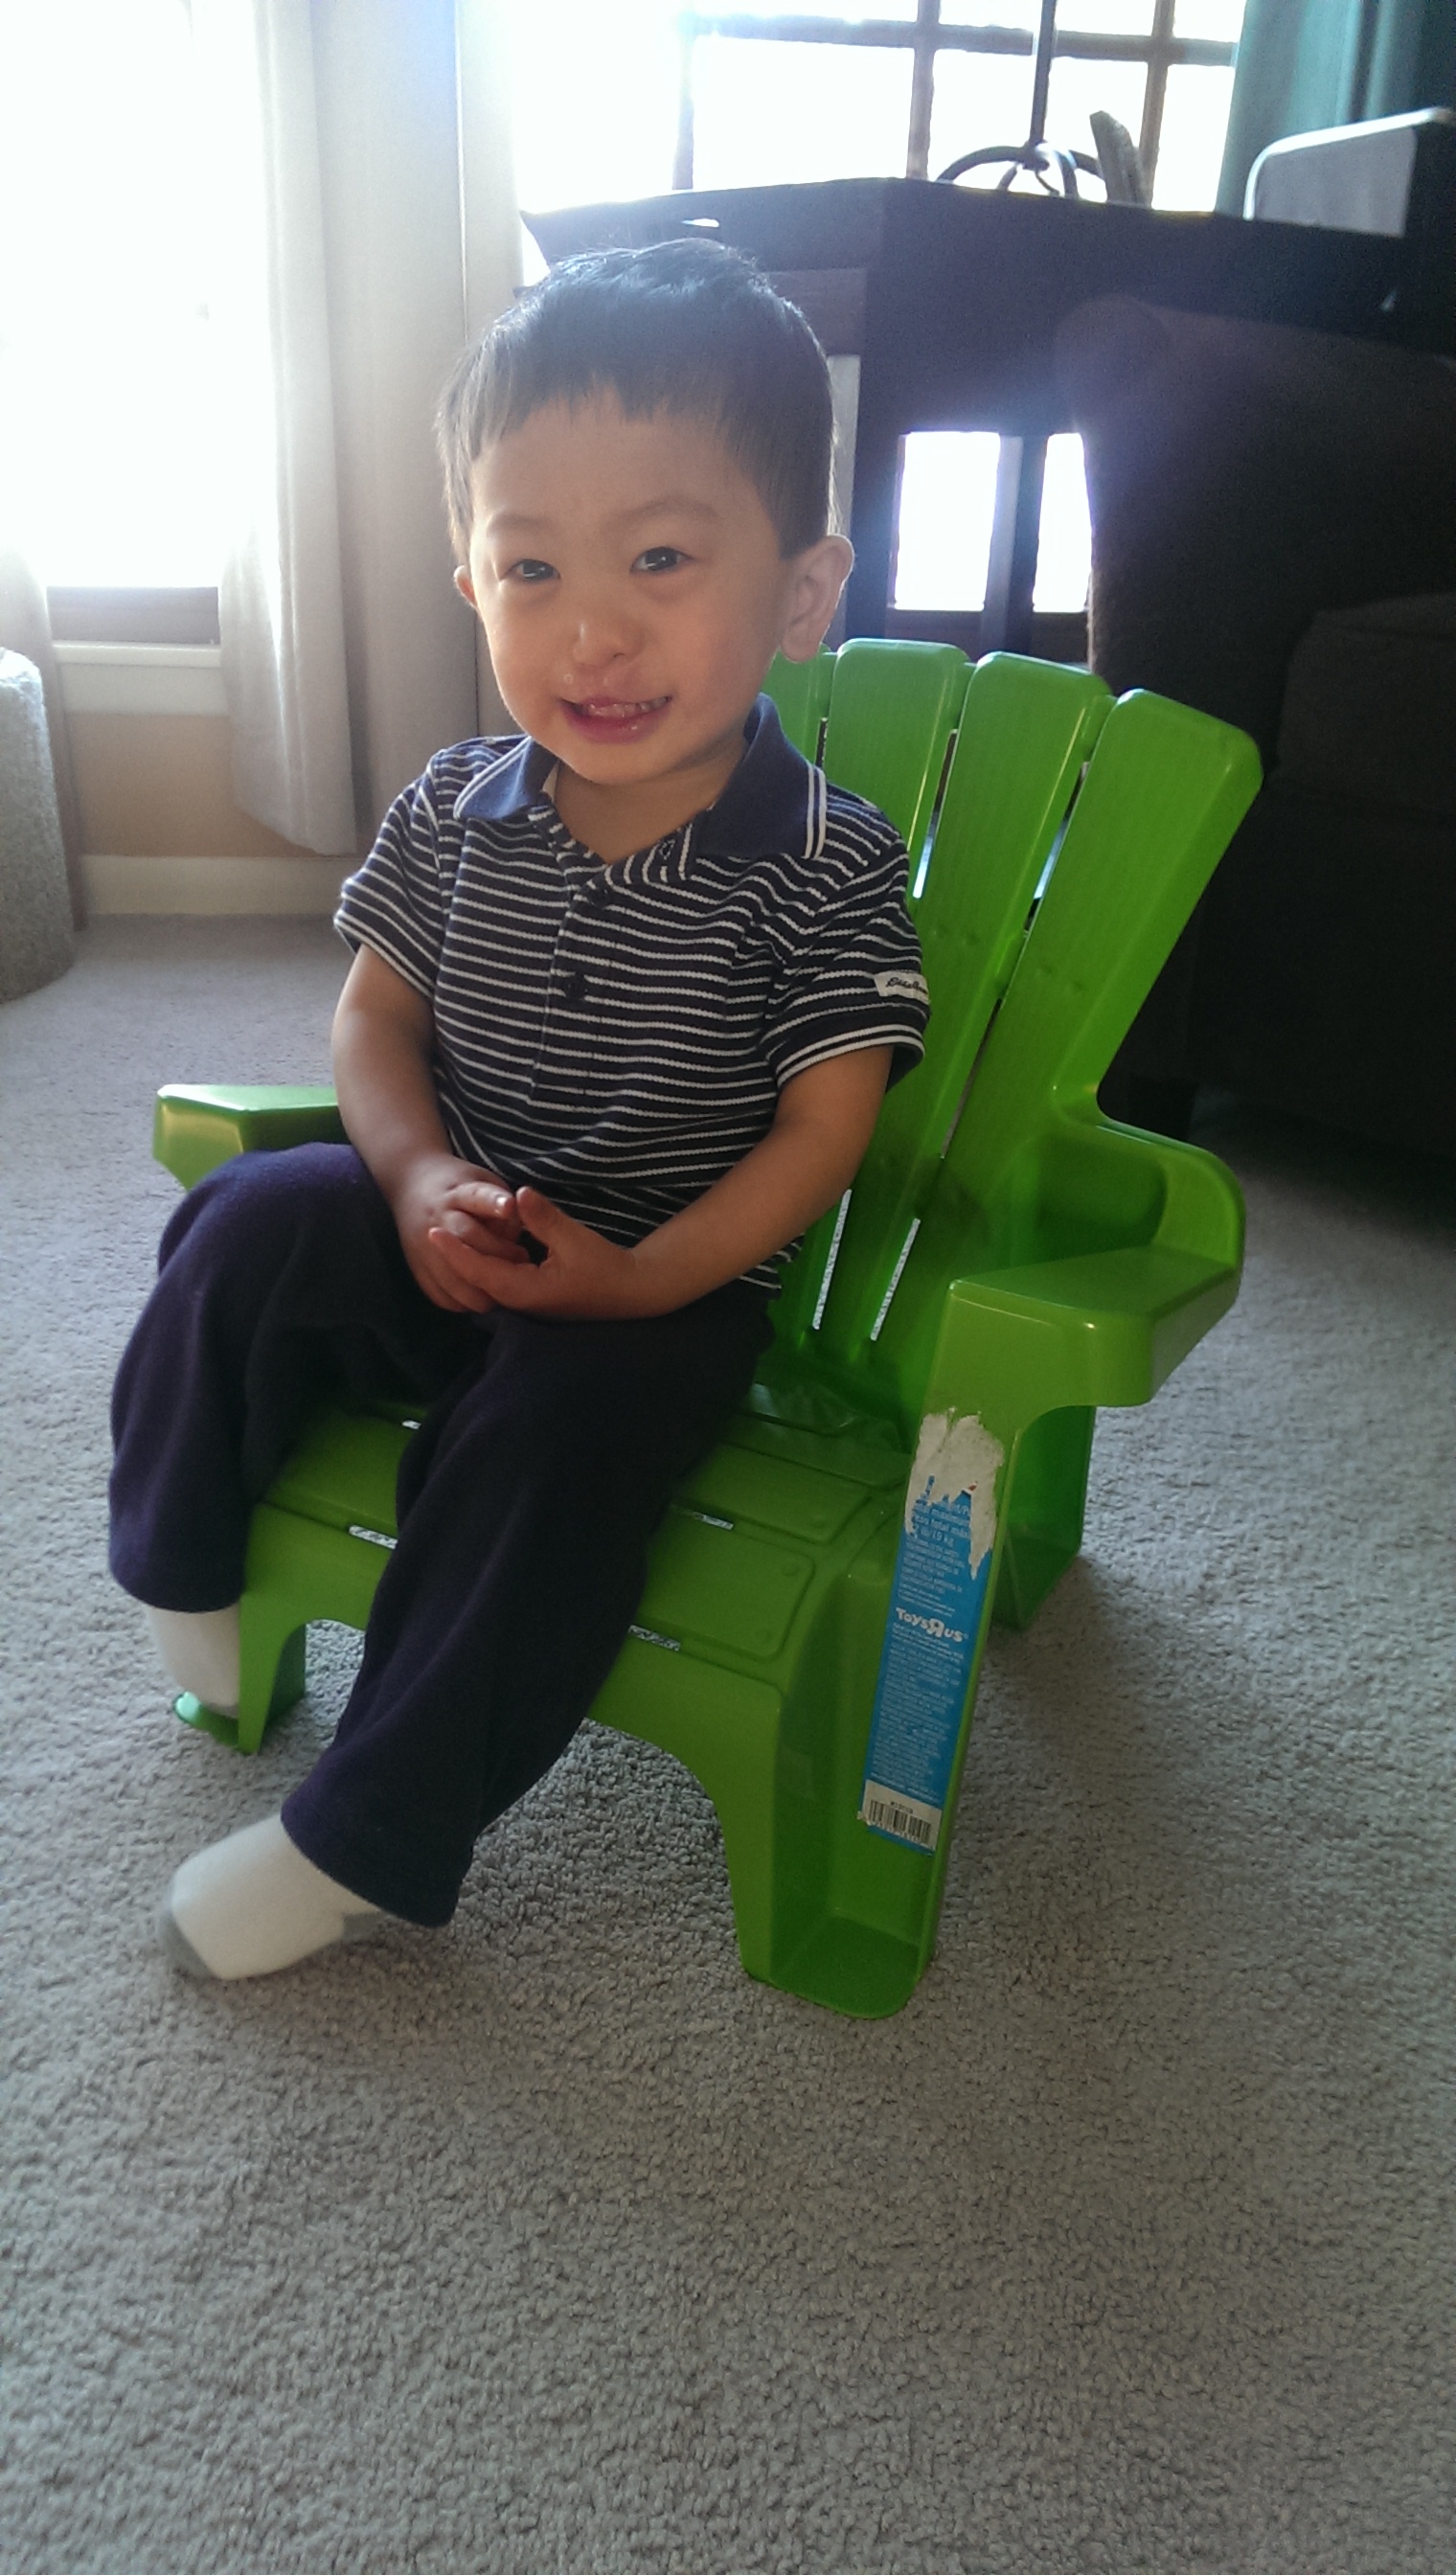 Loving his new Adirondack chair. When we ask him to smile, we say "Say lactose!"